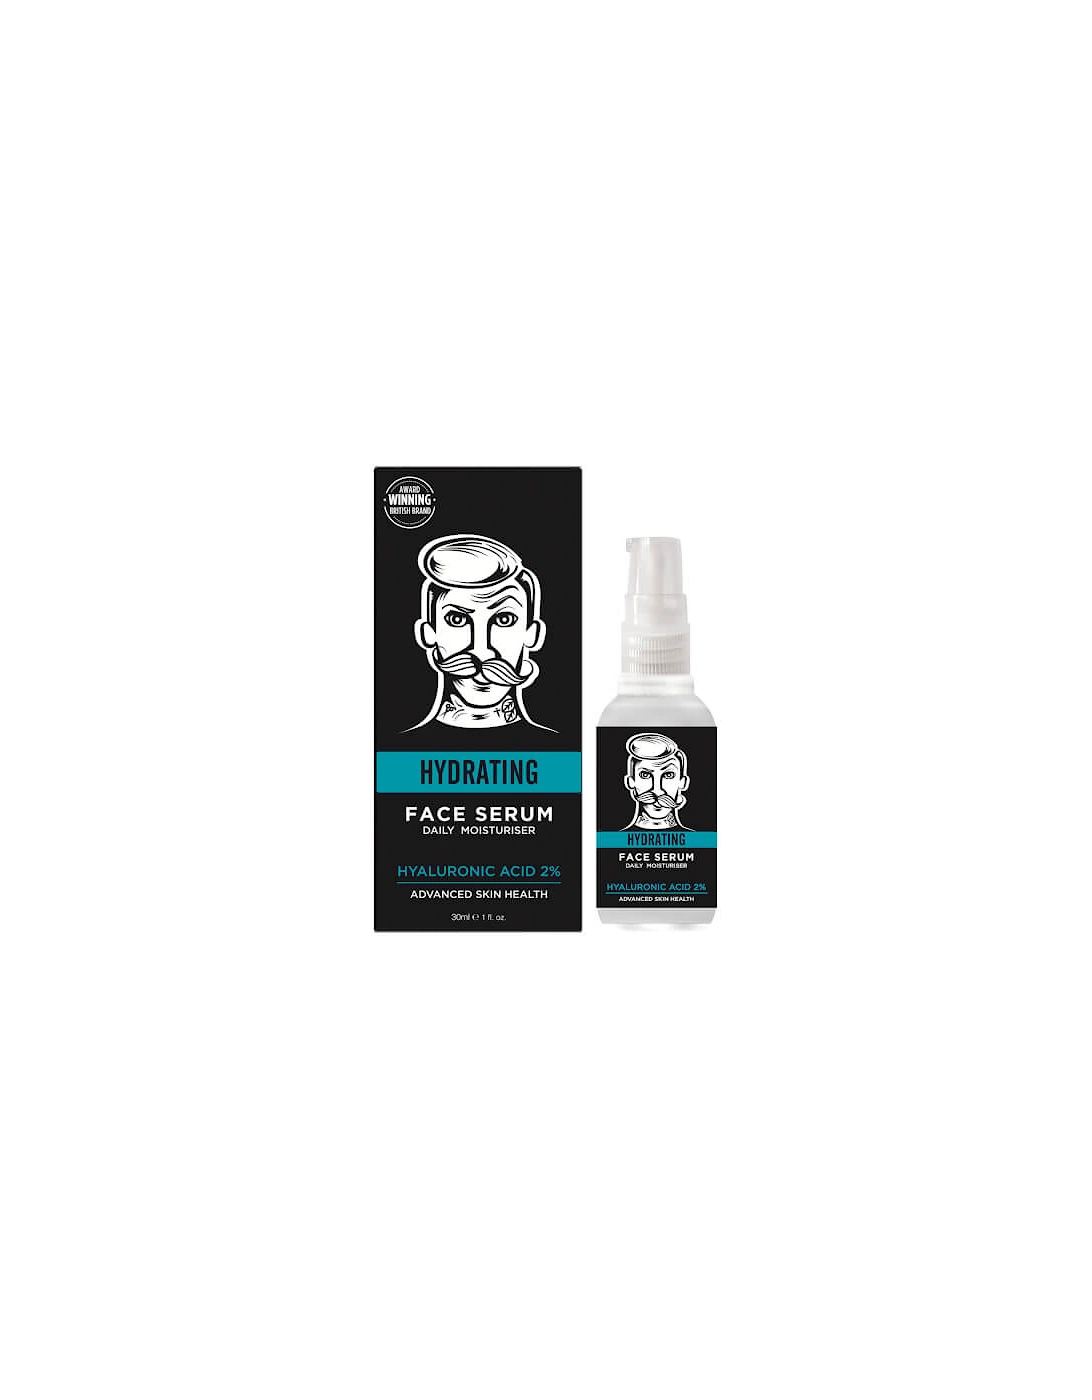 BARBER PRO Hydrating Hyaluronic Acid 2% Face Serum 30ml, 2 of 1